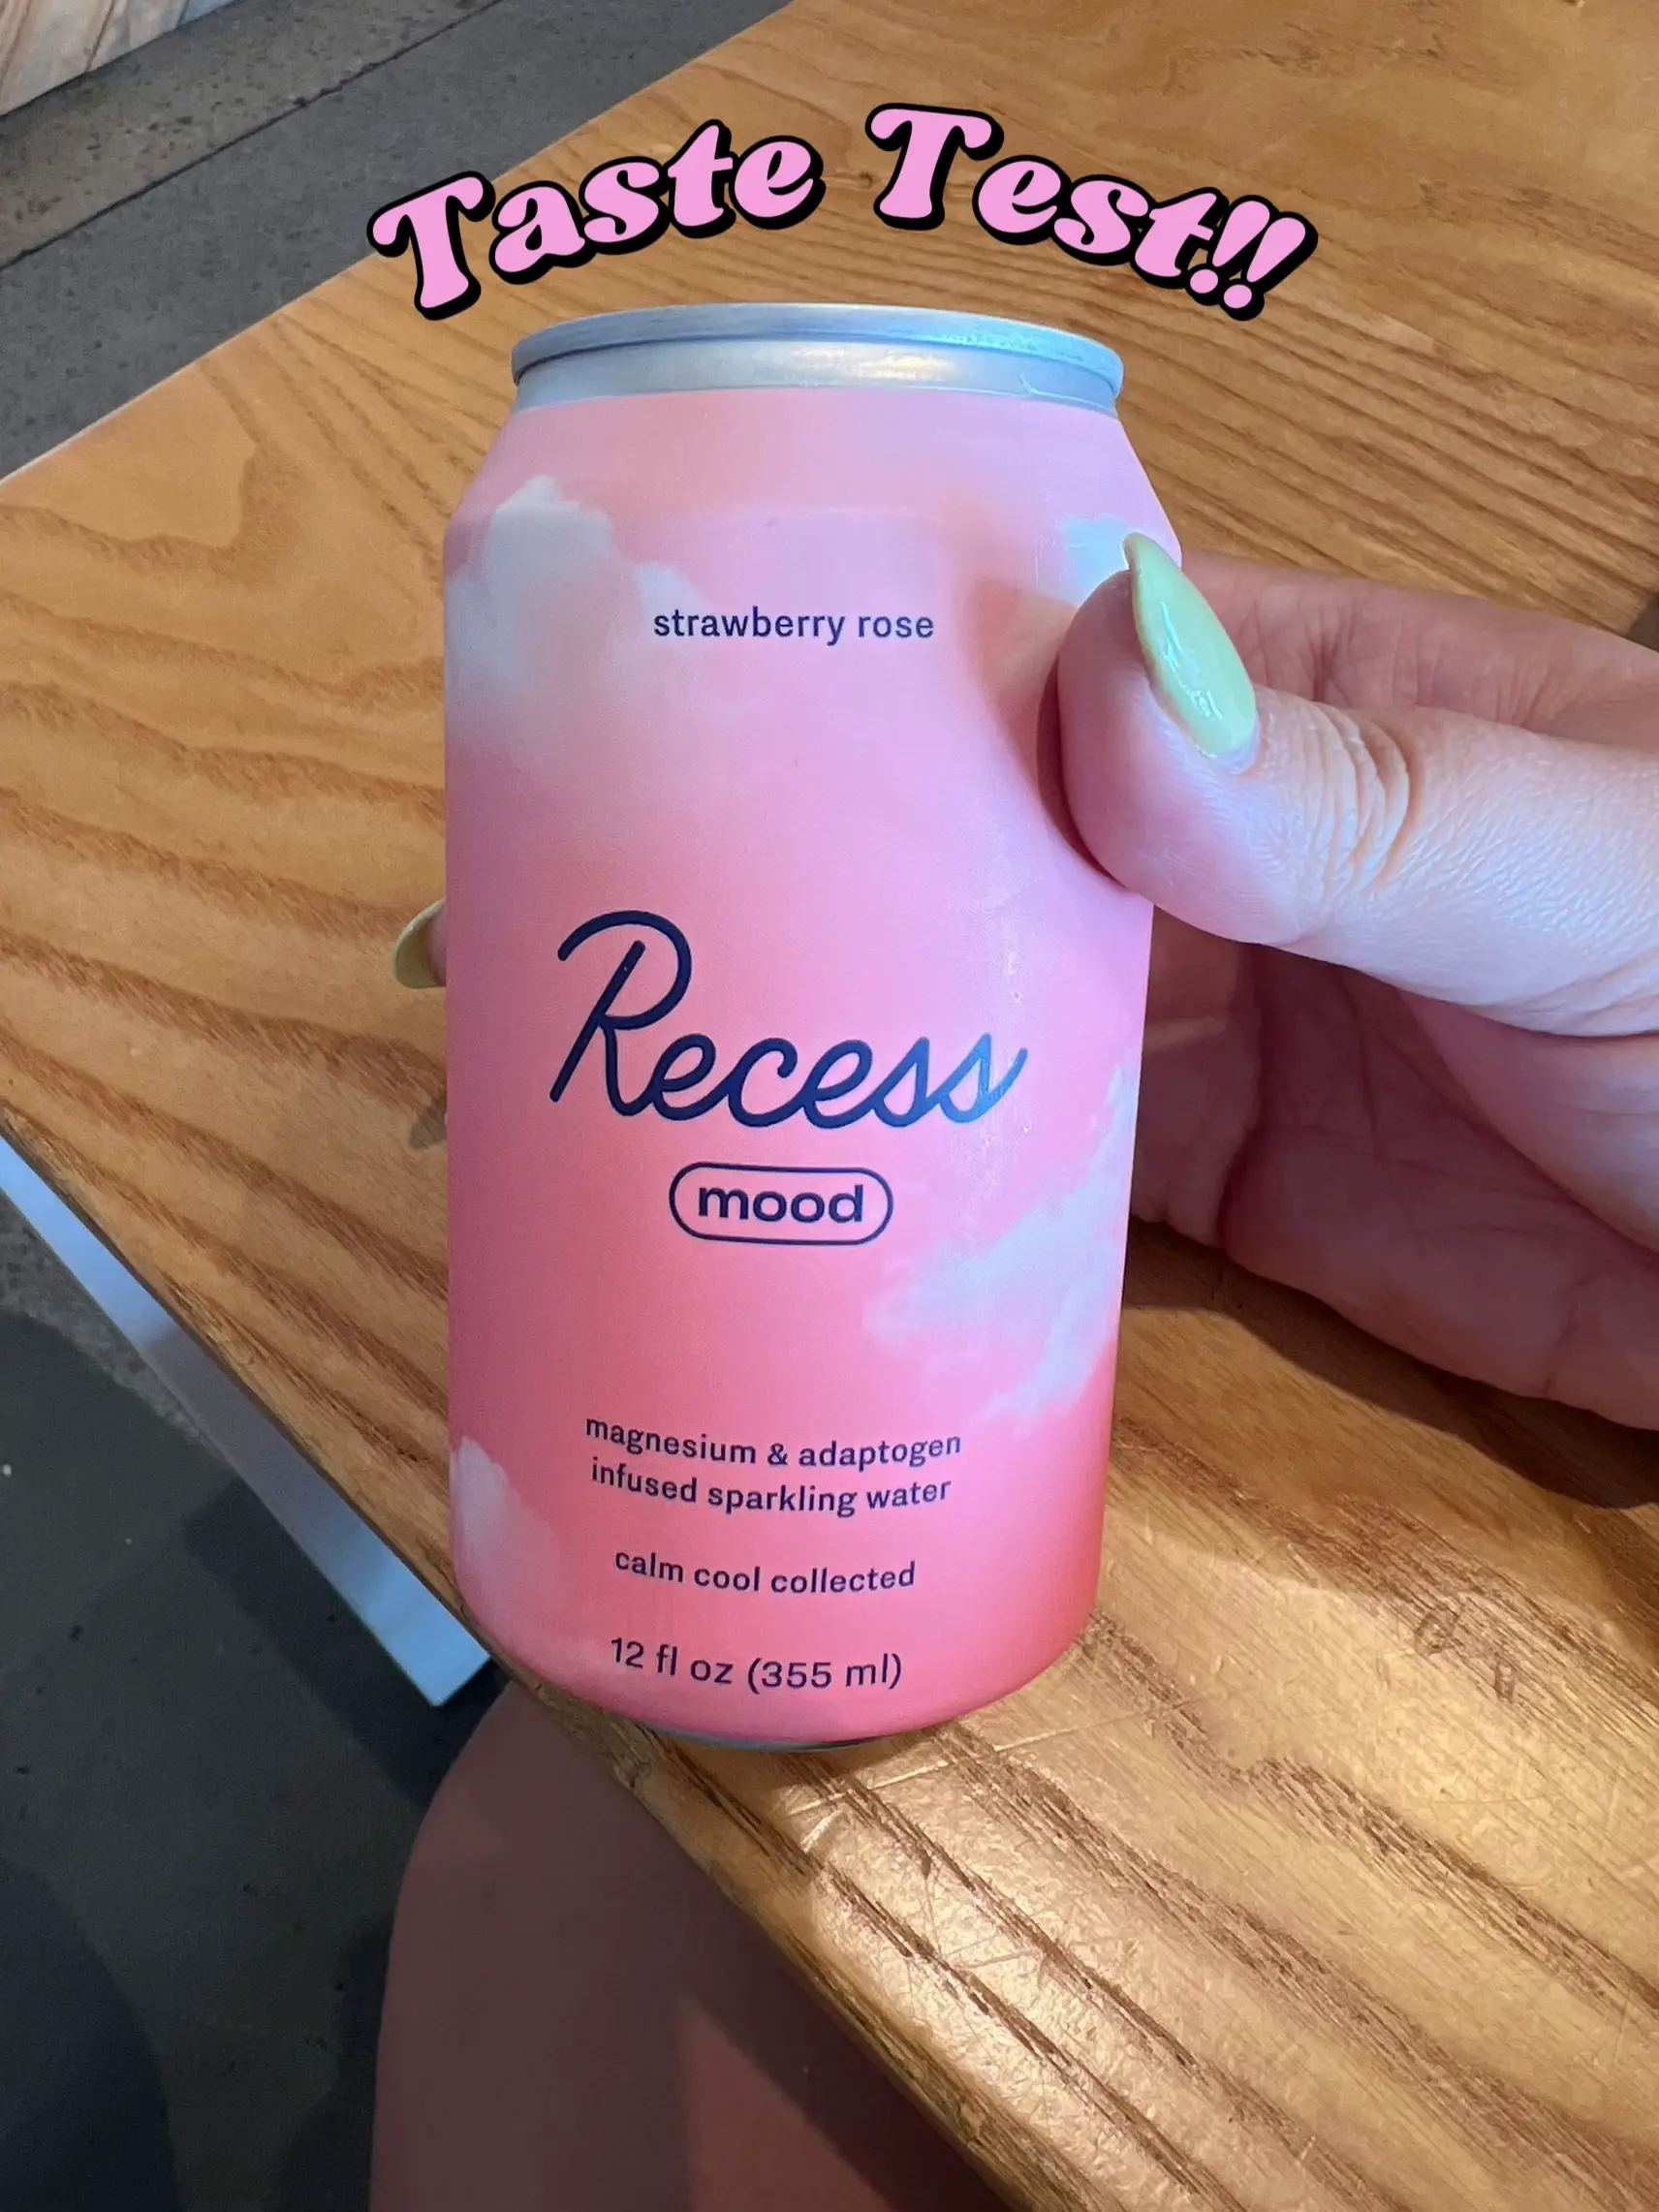 I Tried Recess CBD-Infused Sparkling Water: Here's My Review